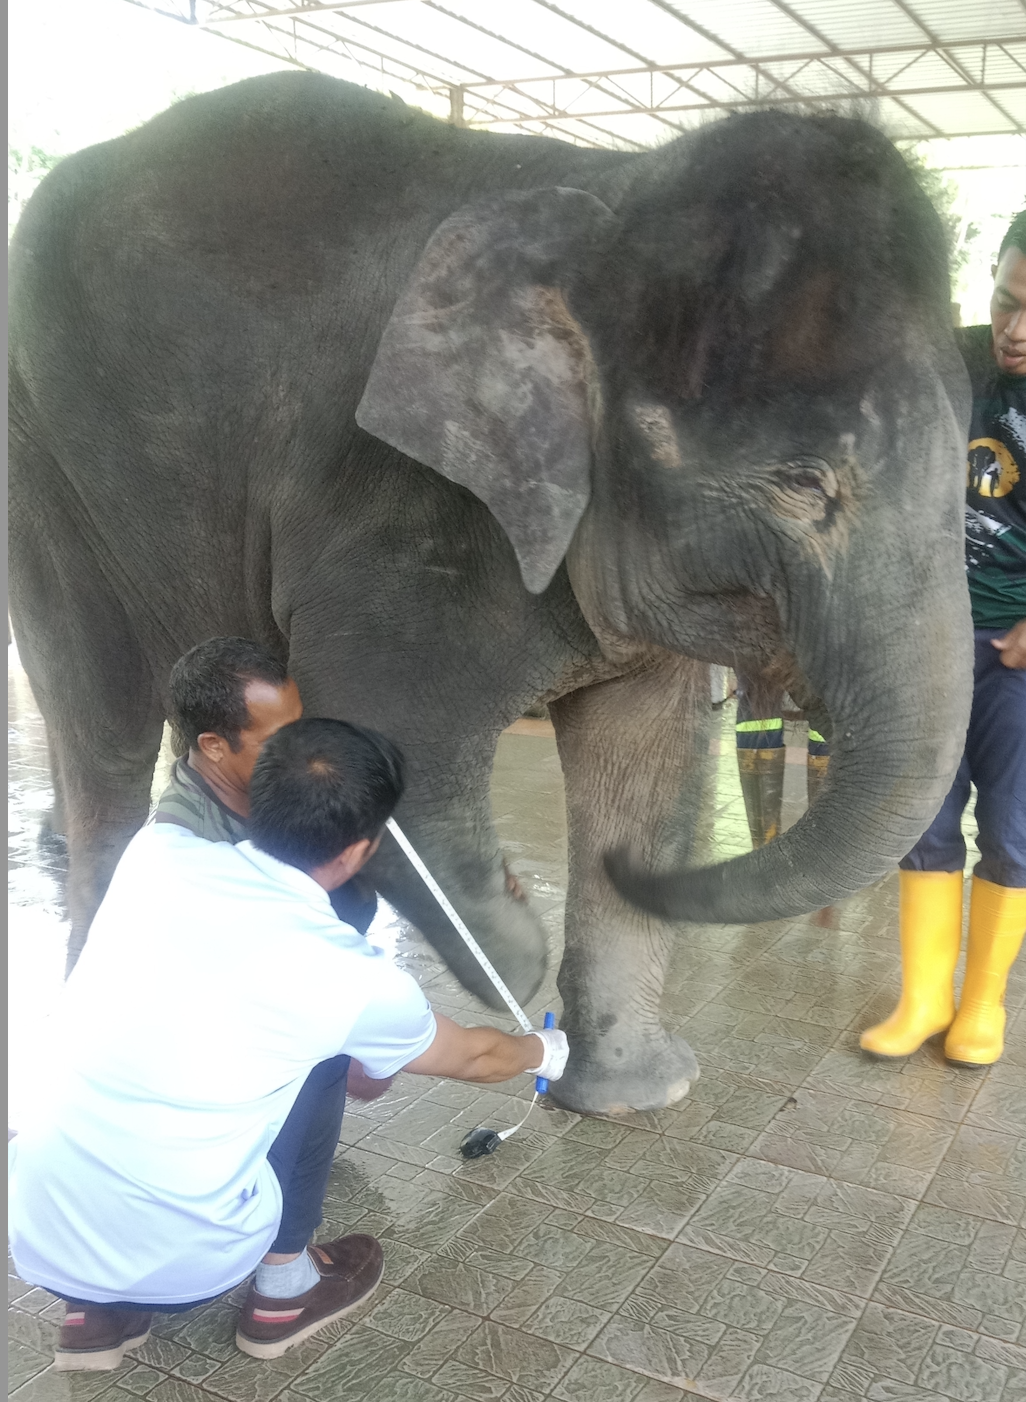 A young elephant's walk of hope